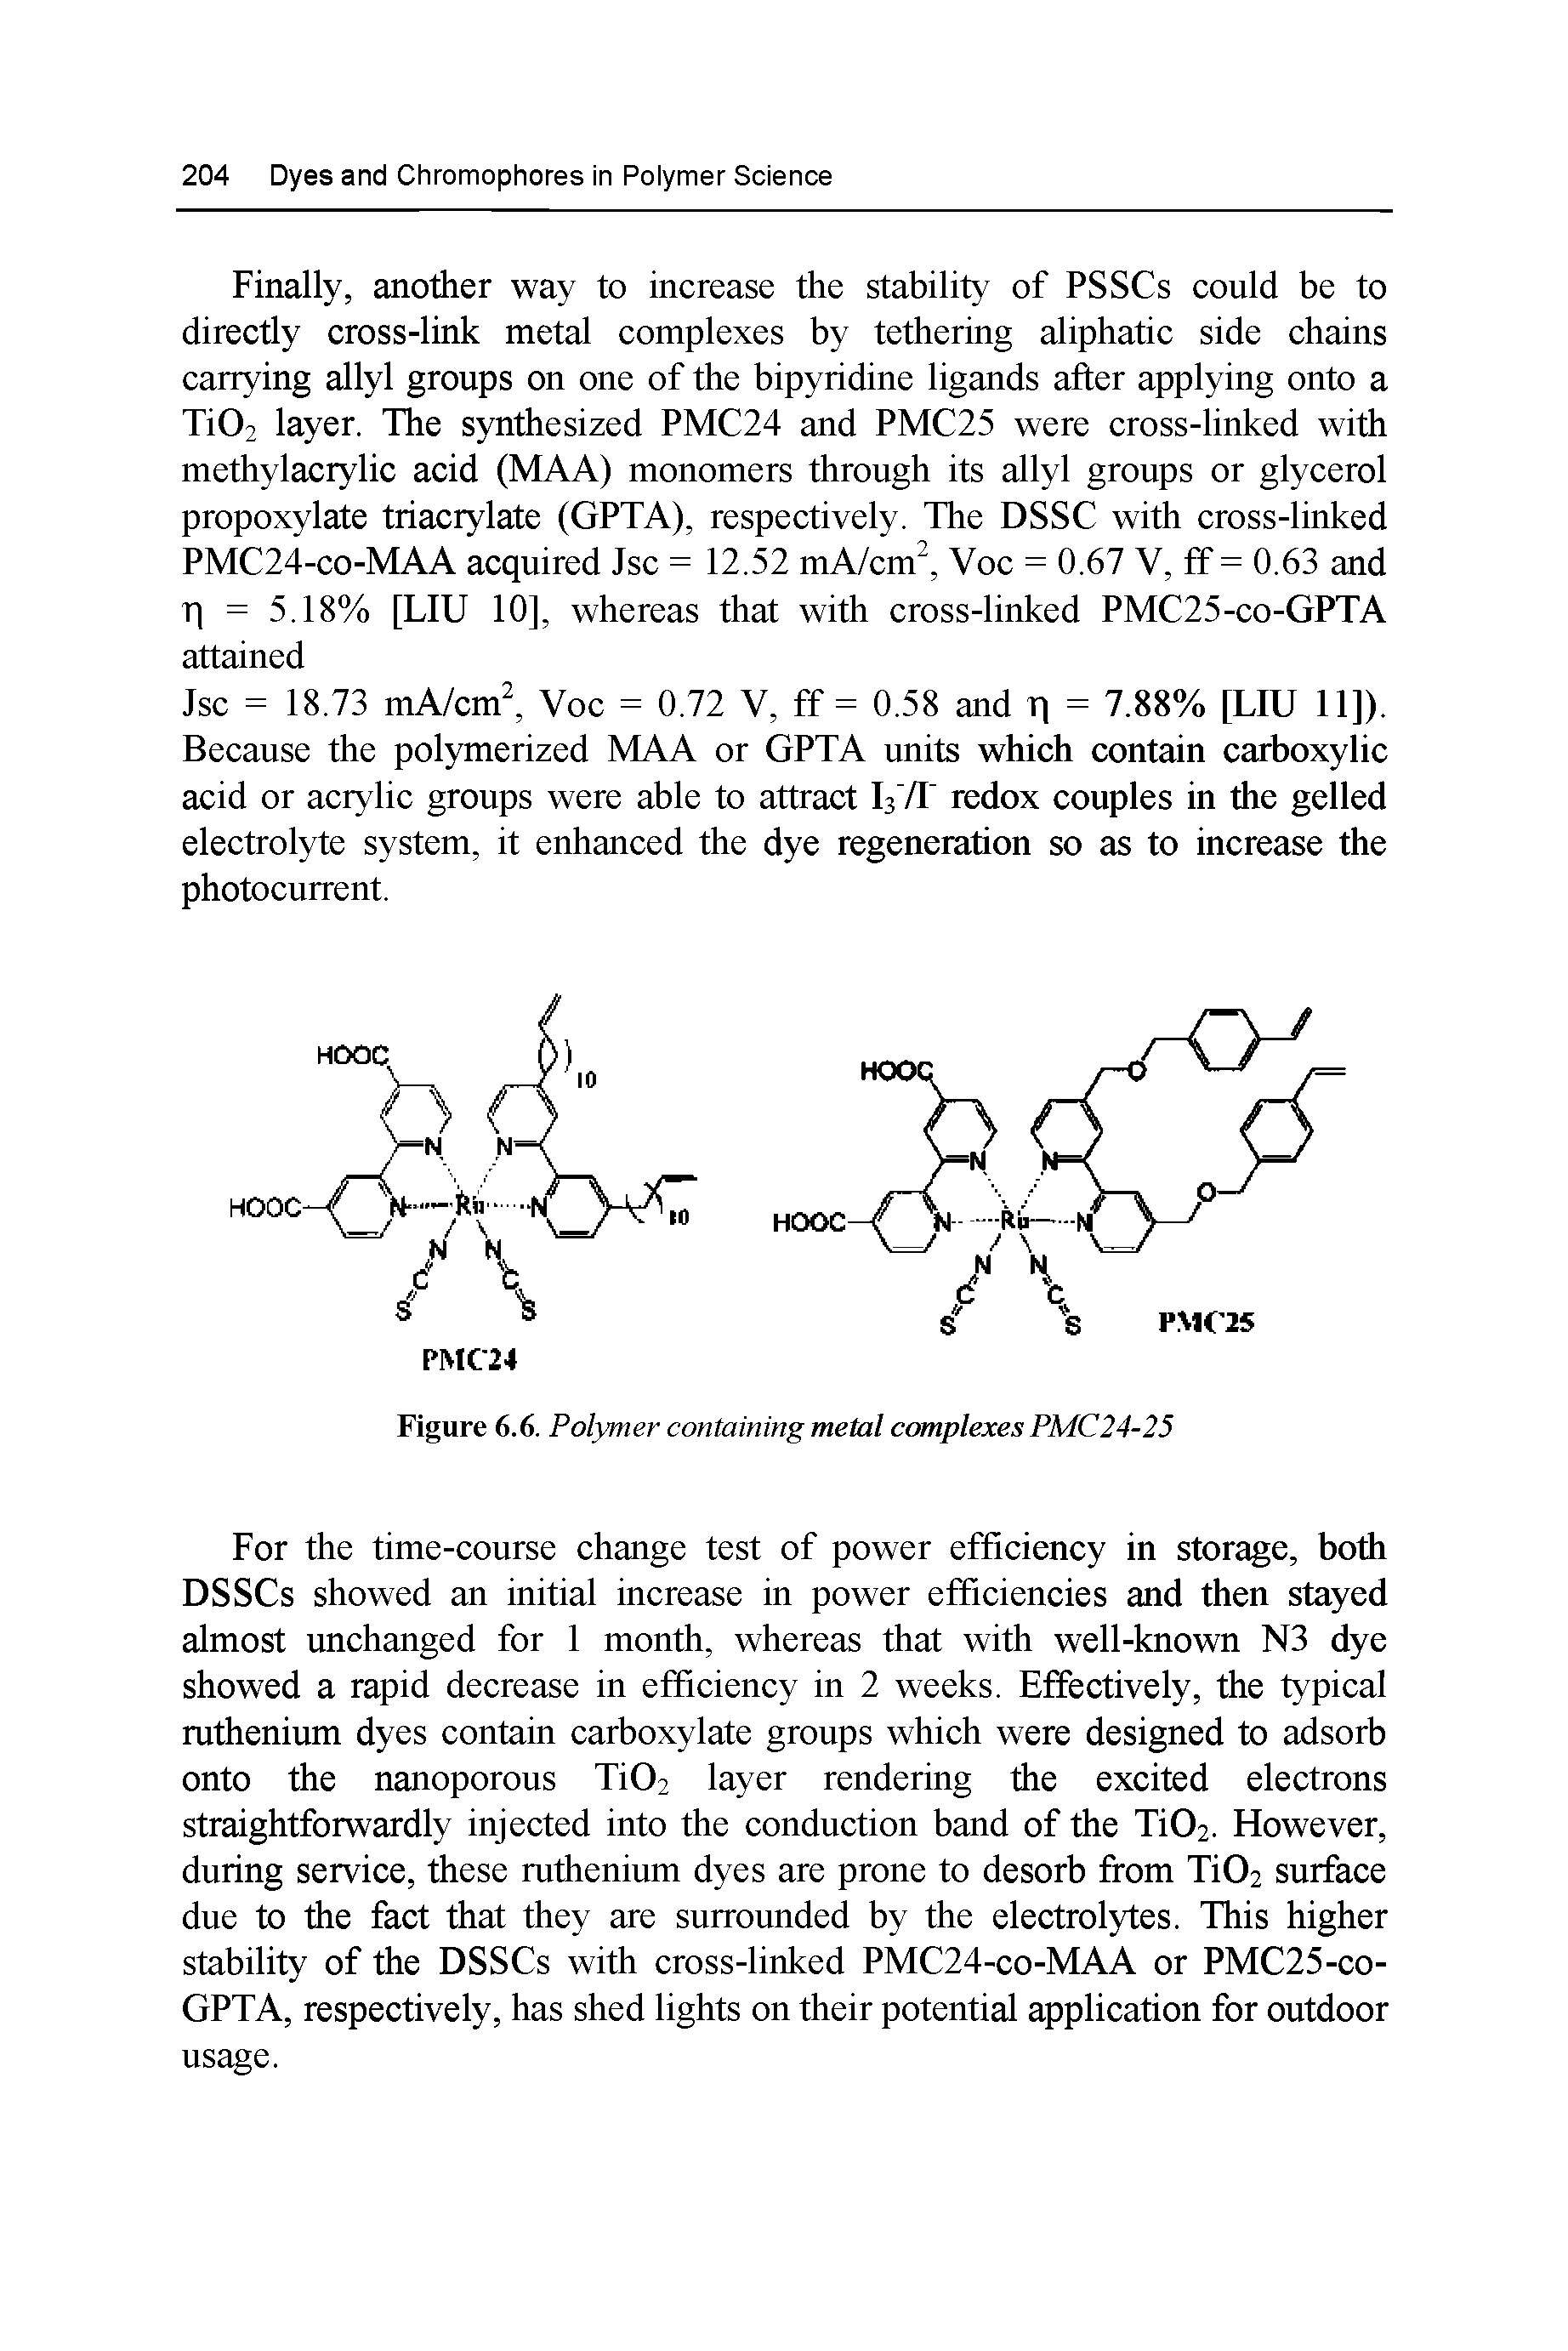 Figure 6.6. Polymer containing metal complexes PMC24-25...